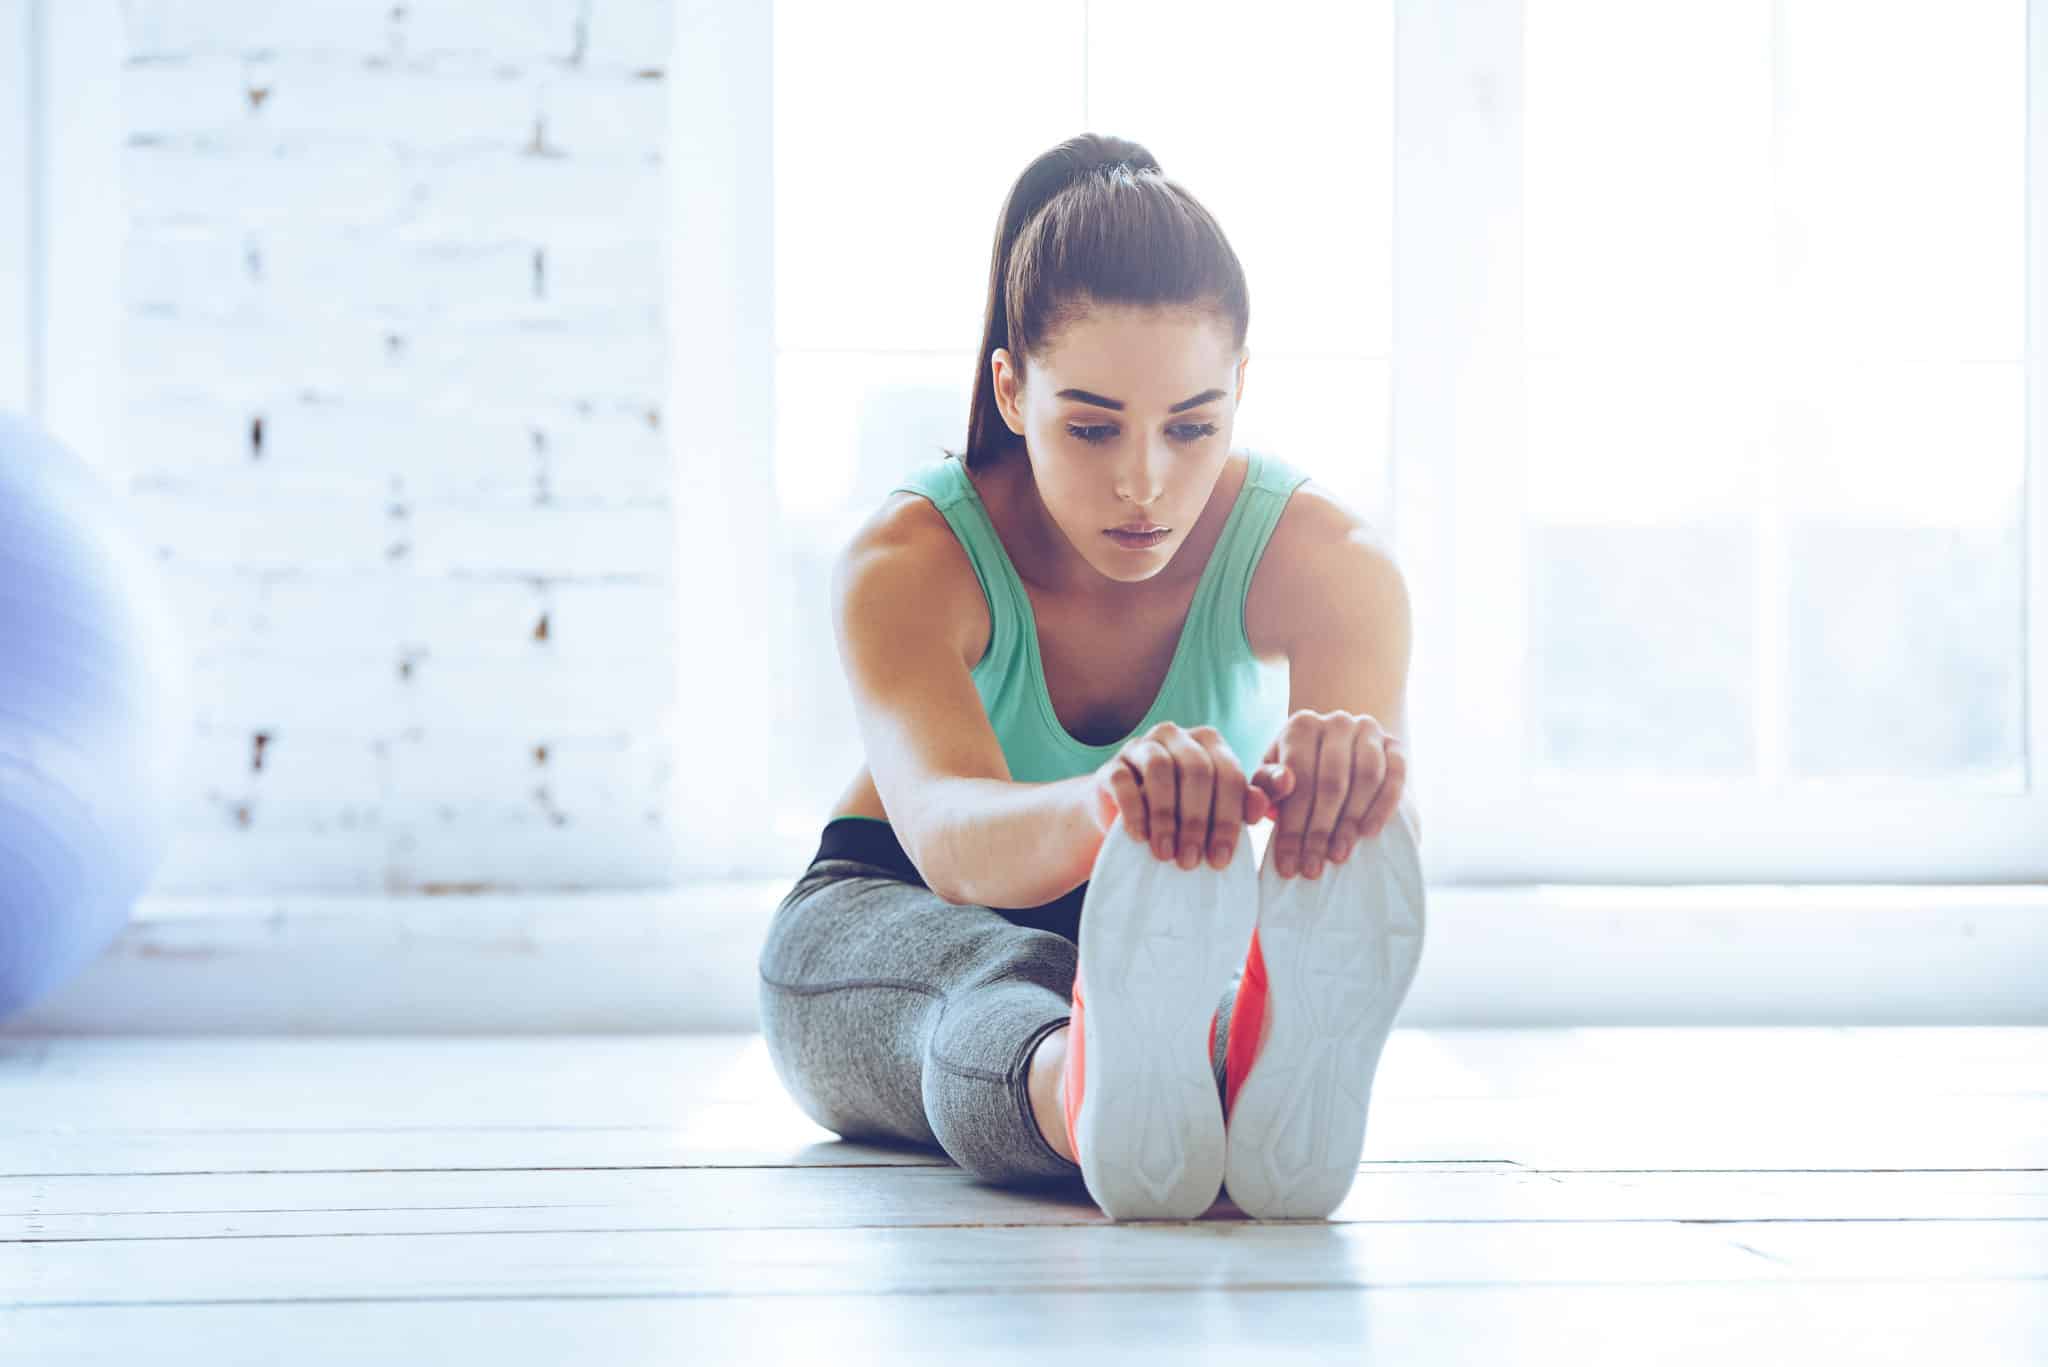 Learn why static stretching can be detrimental before a workout.